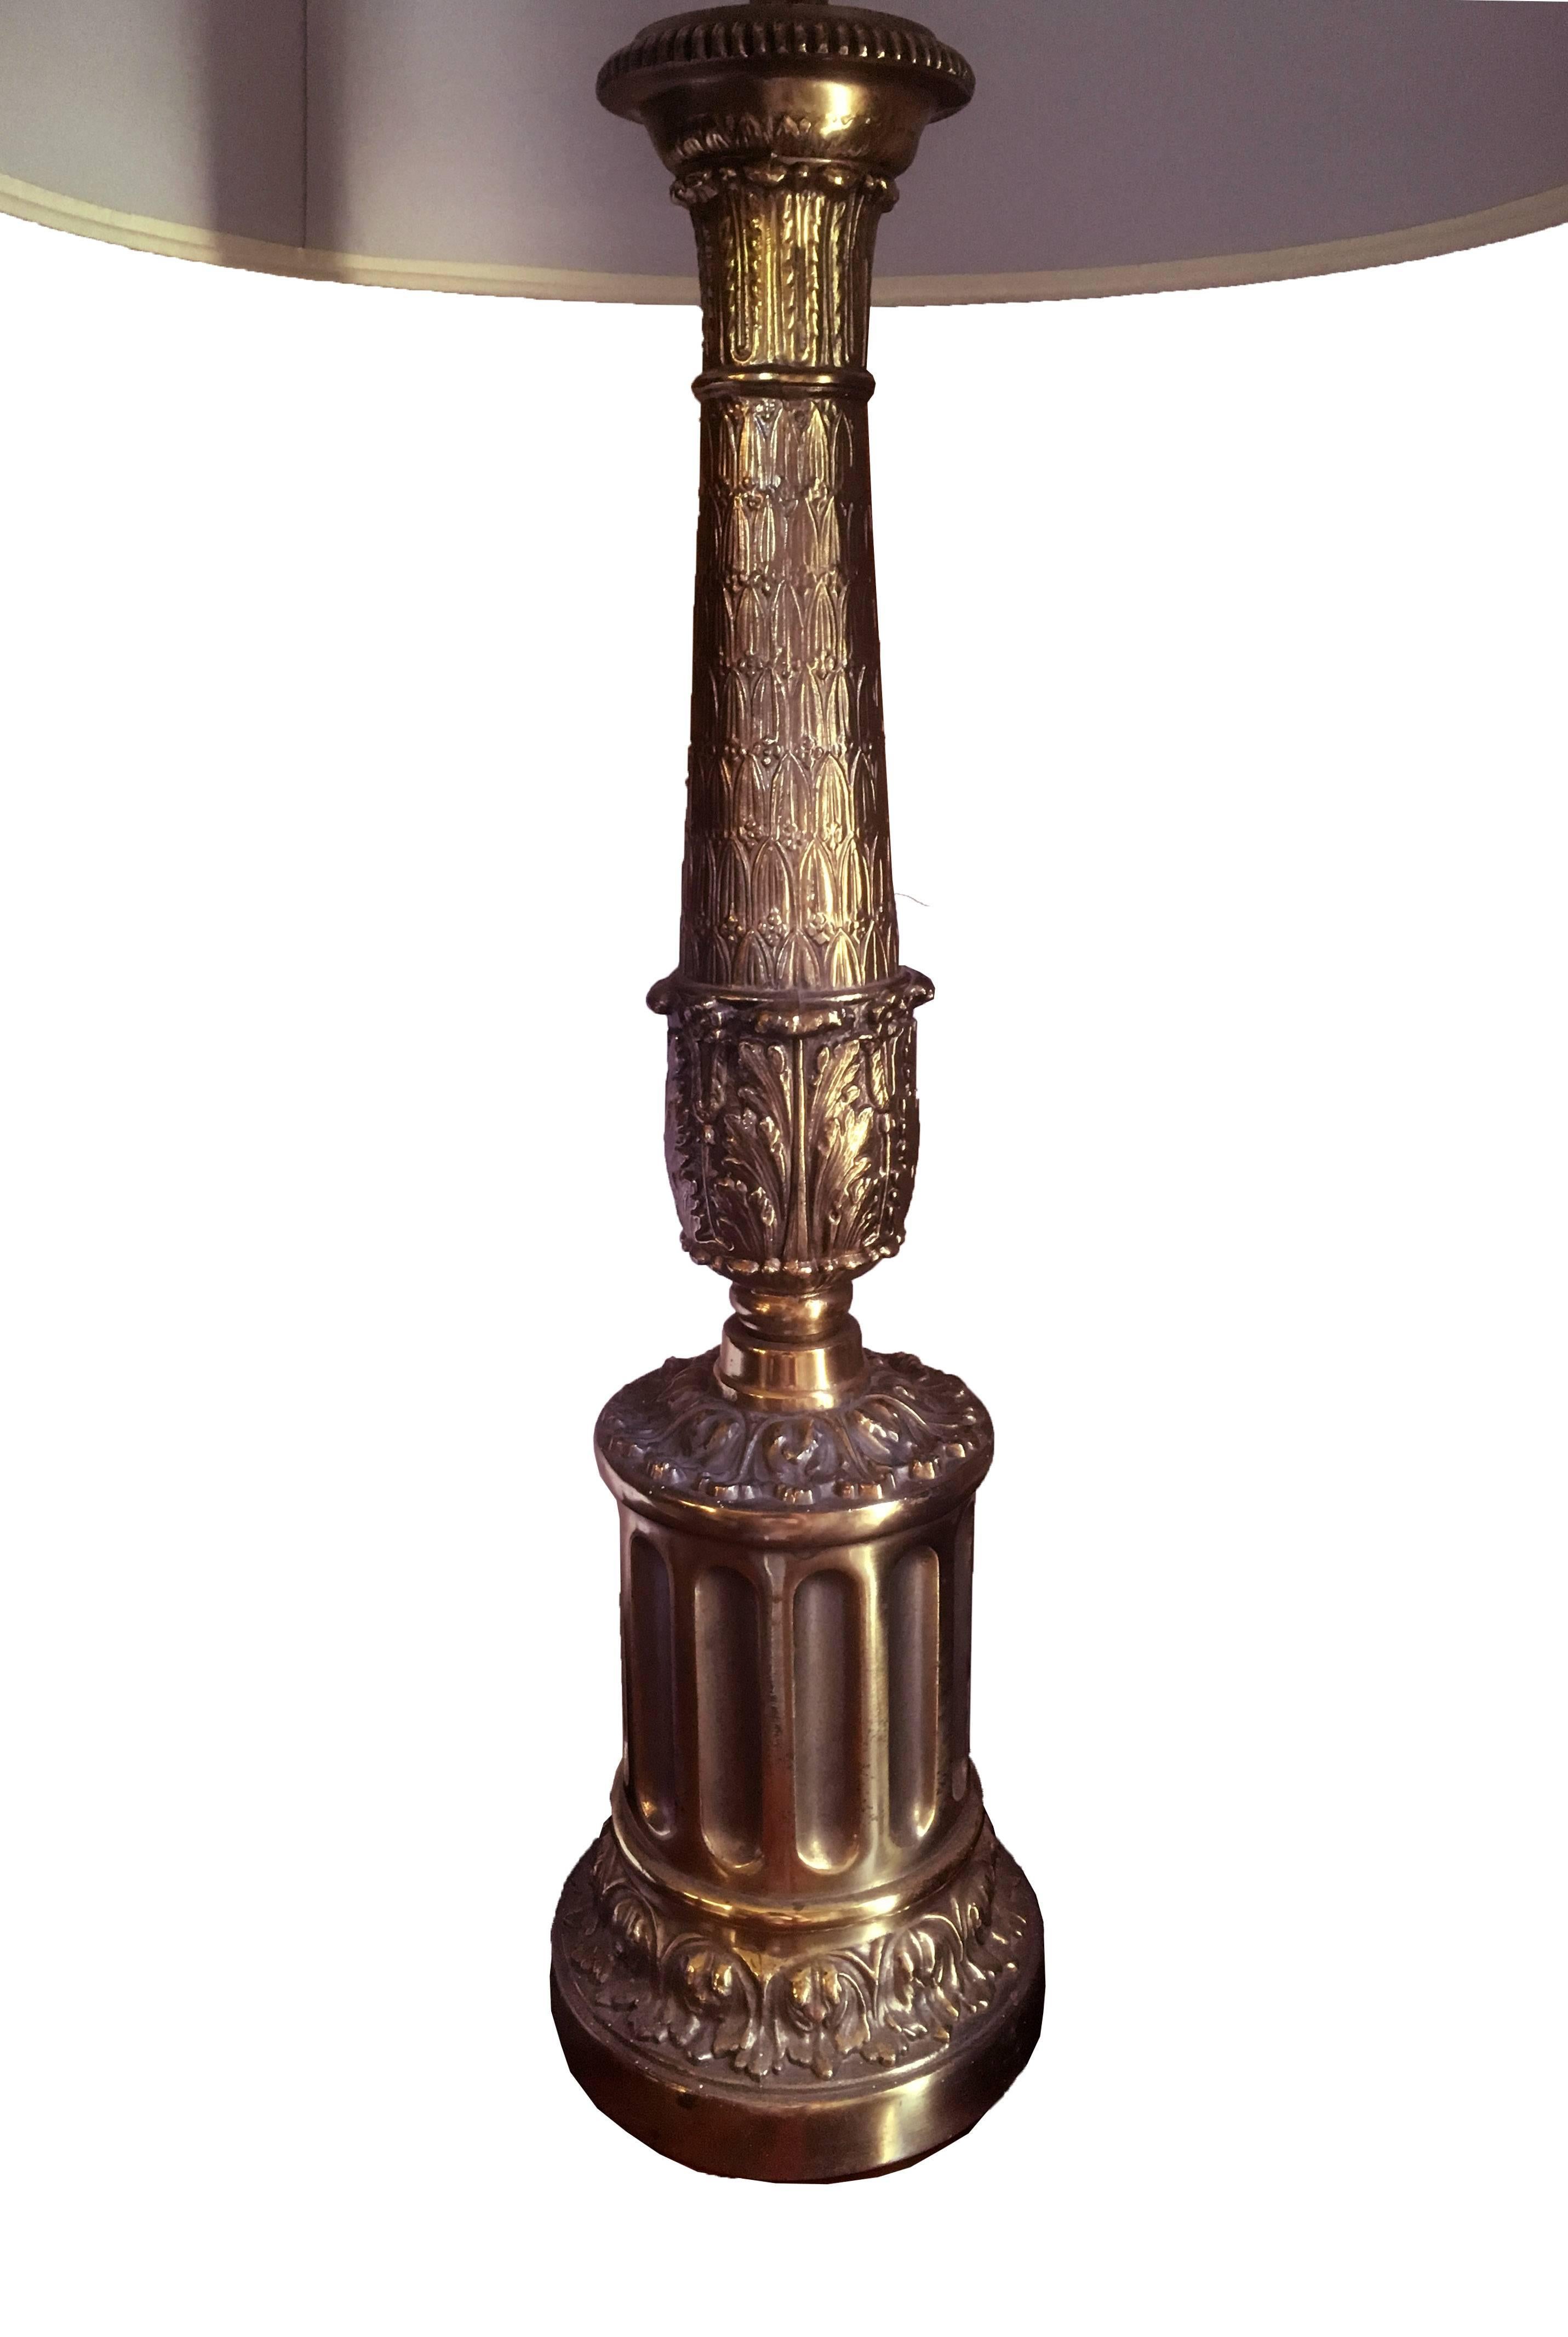 A finely detailed lamp, a round plinth rests of a fluted cylinder and a Roman acanthus balustrade supports a single light. The round shade has a subtle purple cast, United States, circa 1950.